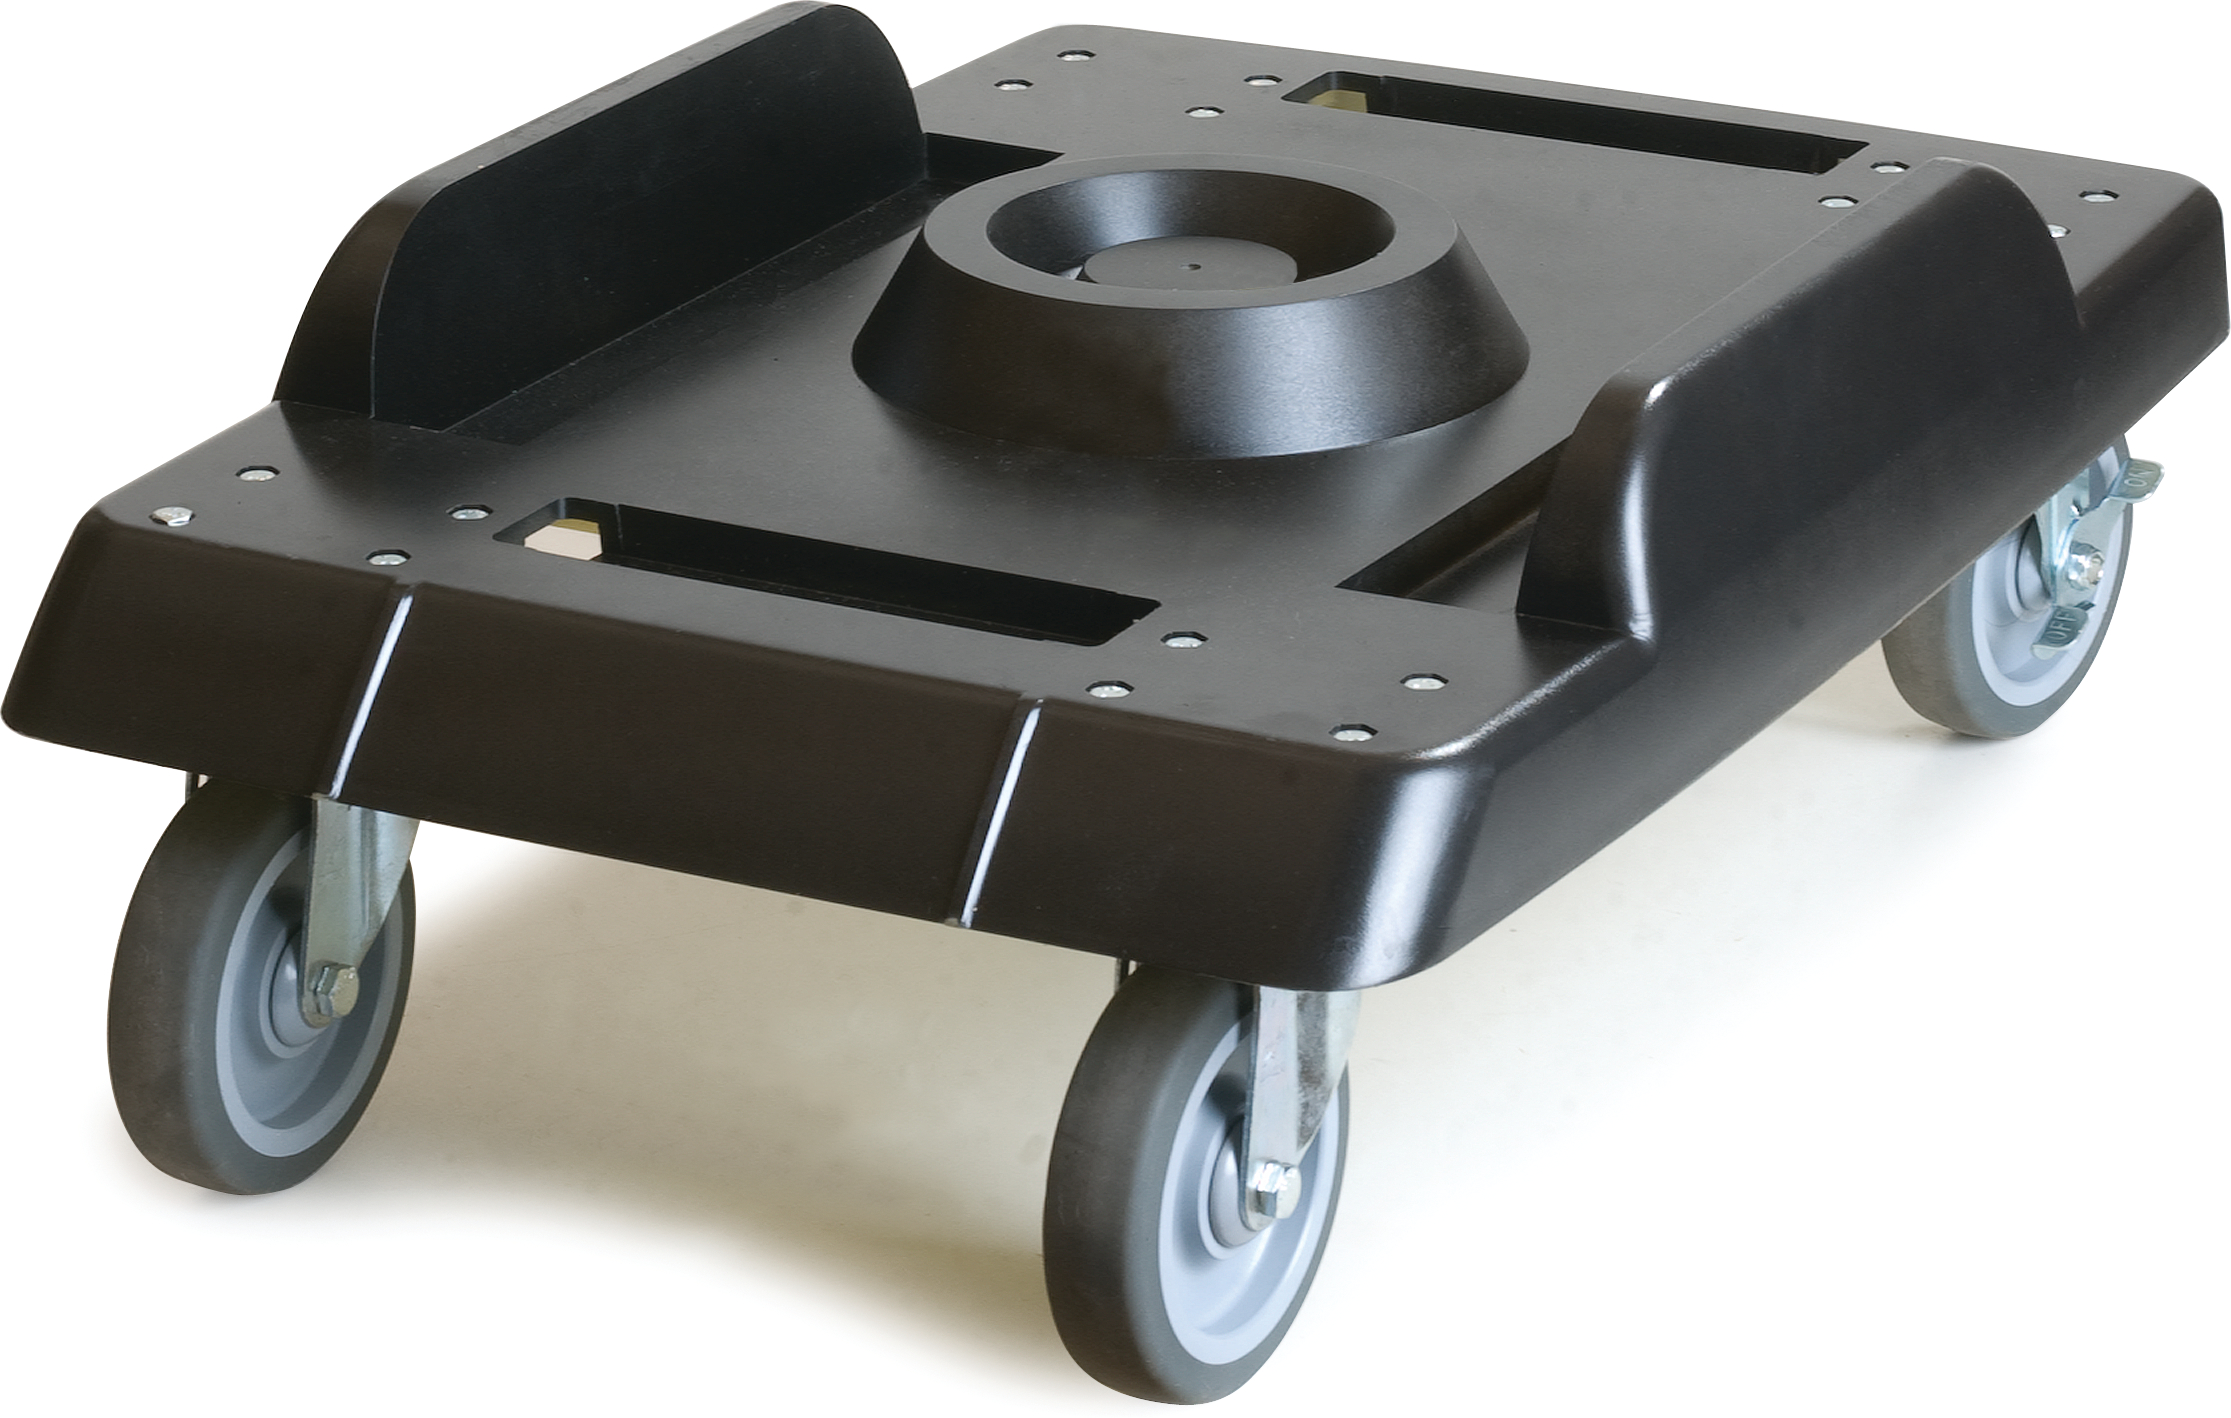 Dolly for End Loader With Casters - Black